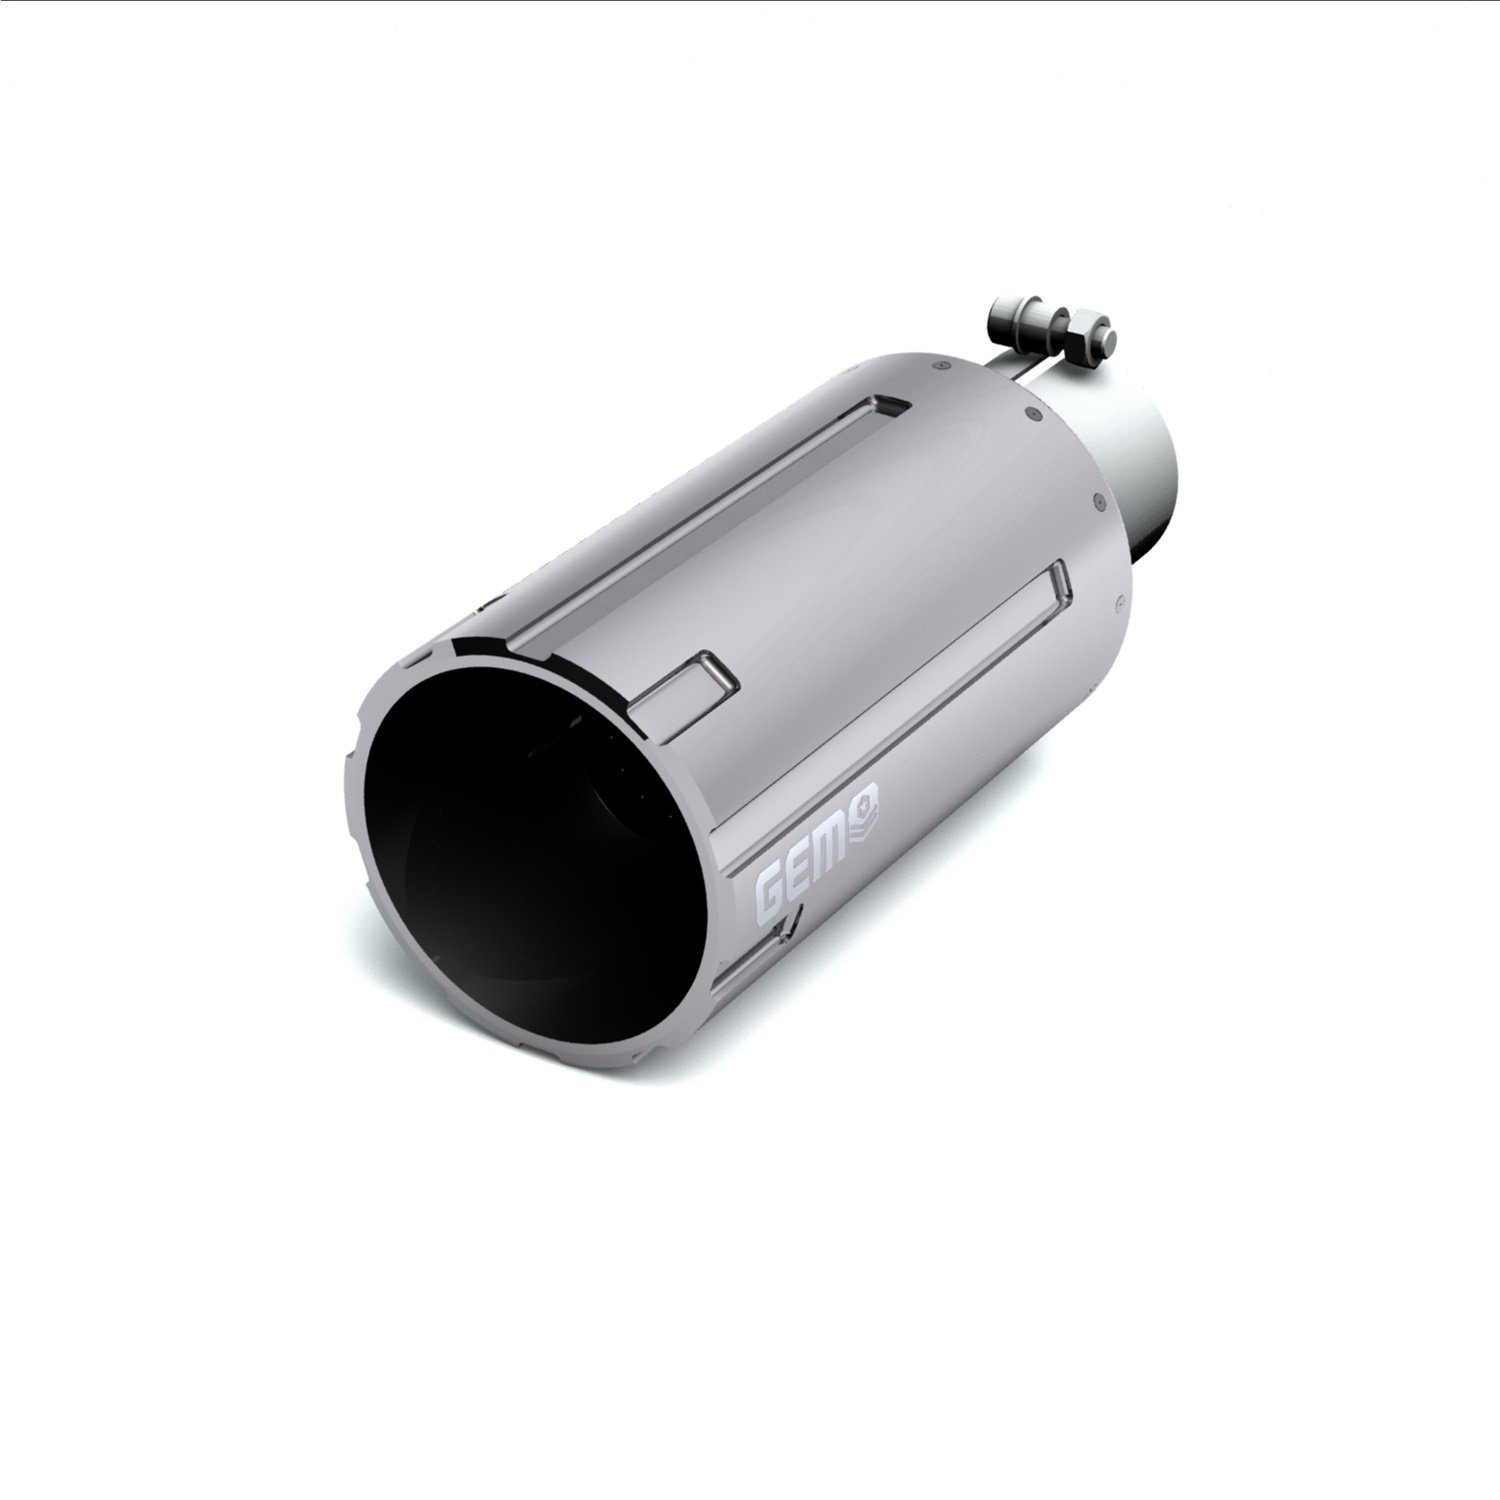 GEM Billet Exhaust Tip, 2.5 in. Inlet/5 in. Outlet x 12 in. Length, Aluminum/304 Stainless Steel, BARREL Cut [Chrome Finish]